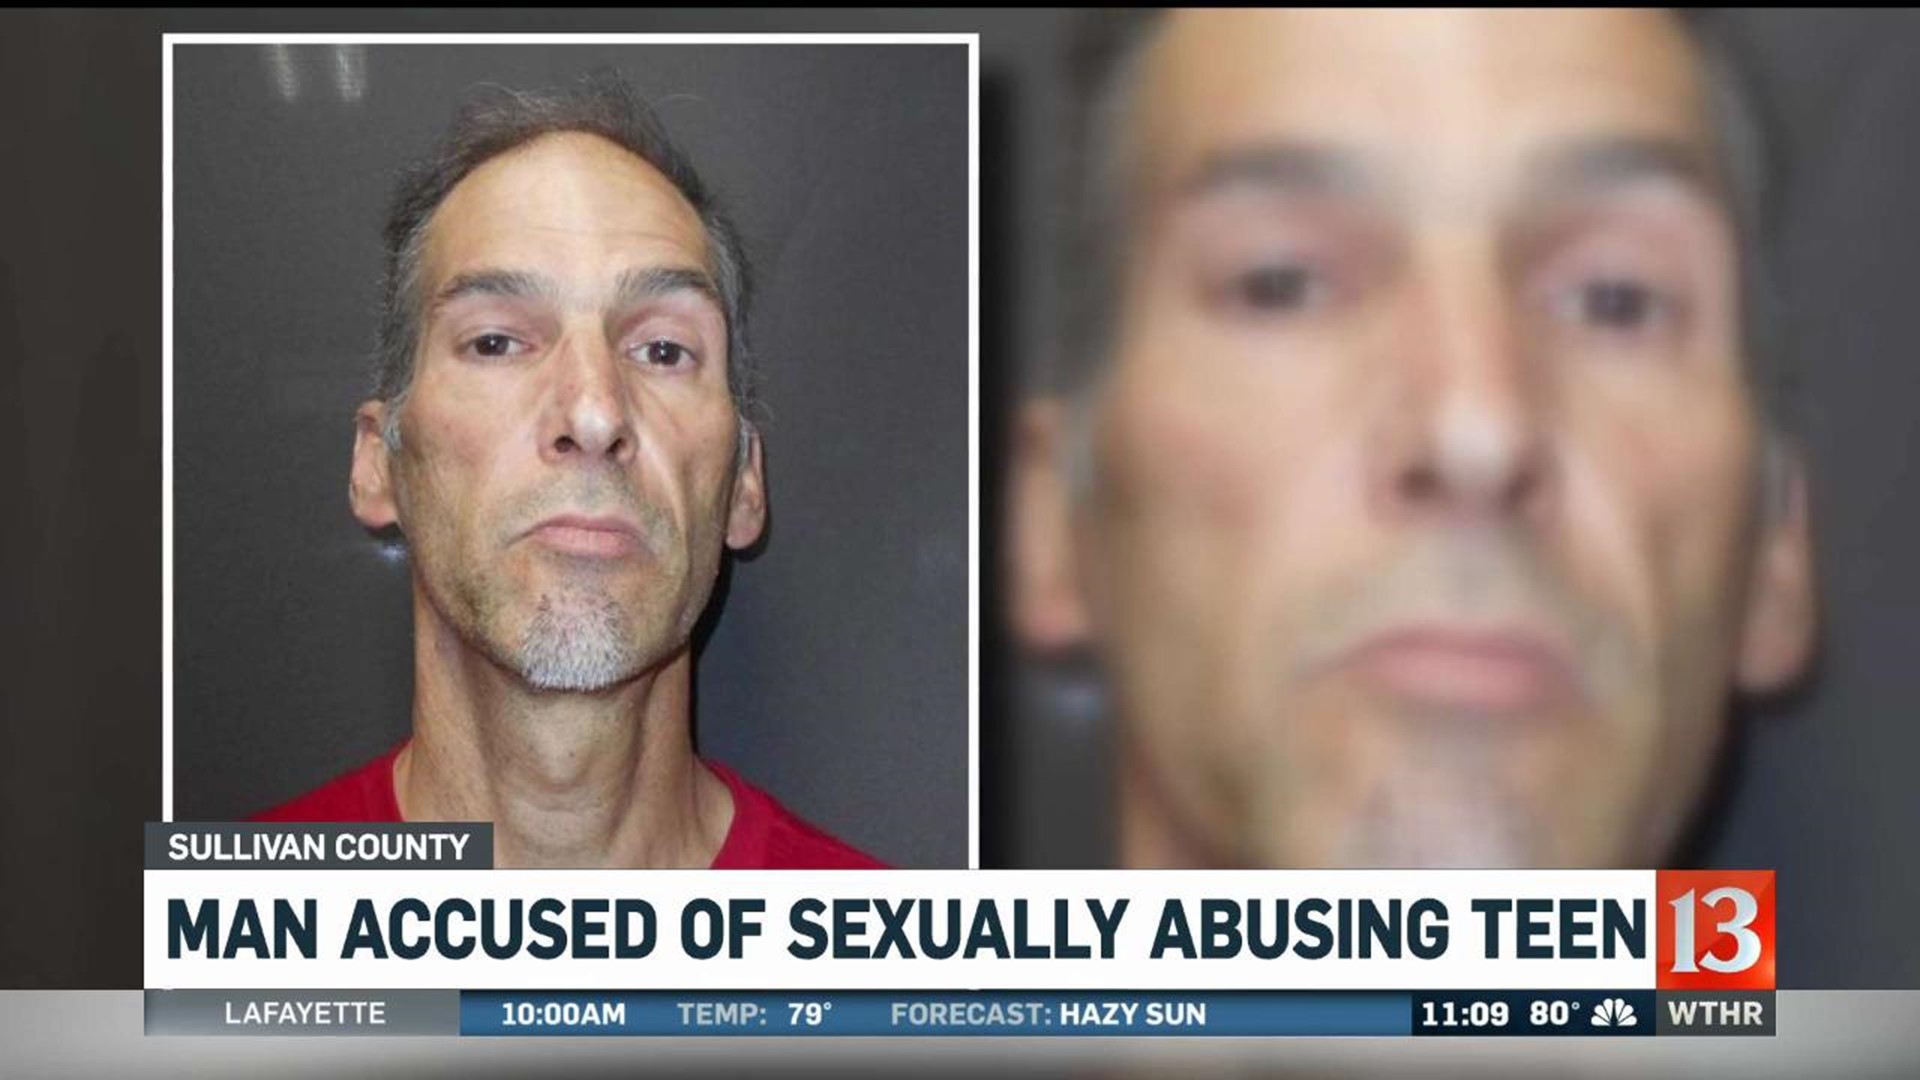 Man Accused of Sexually Abusing Teen